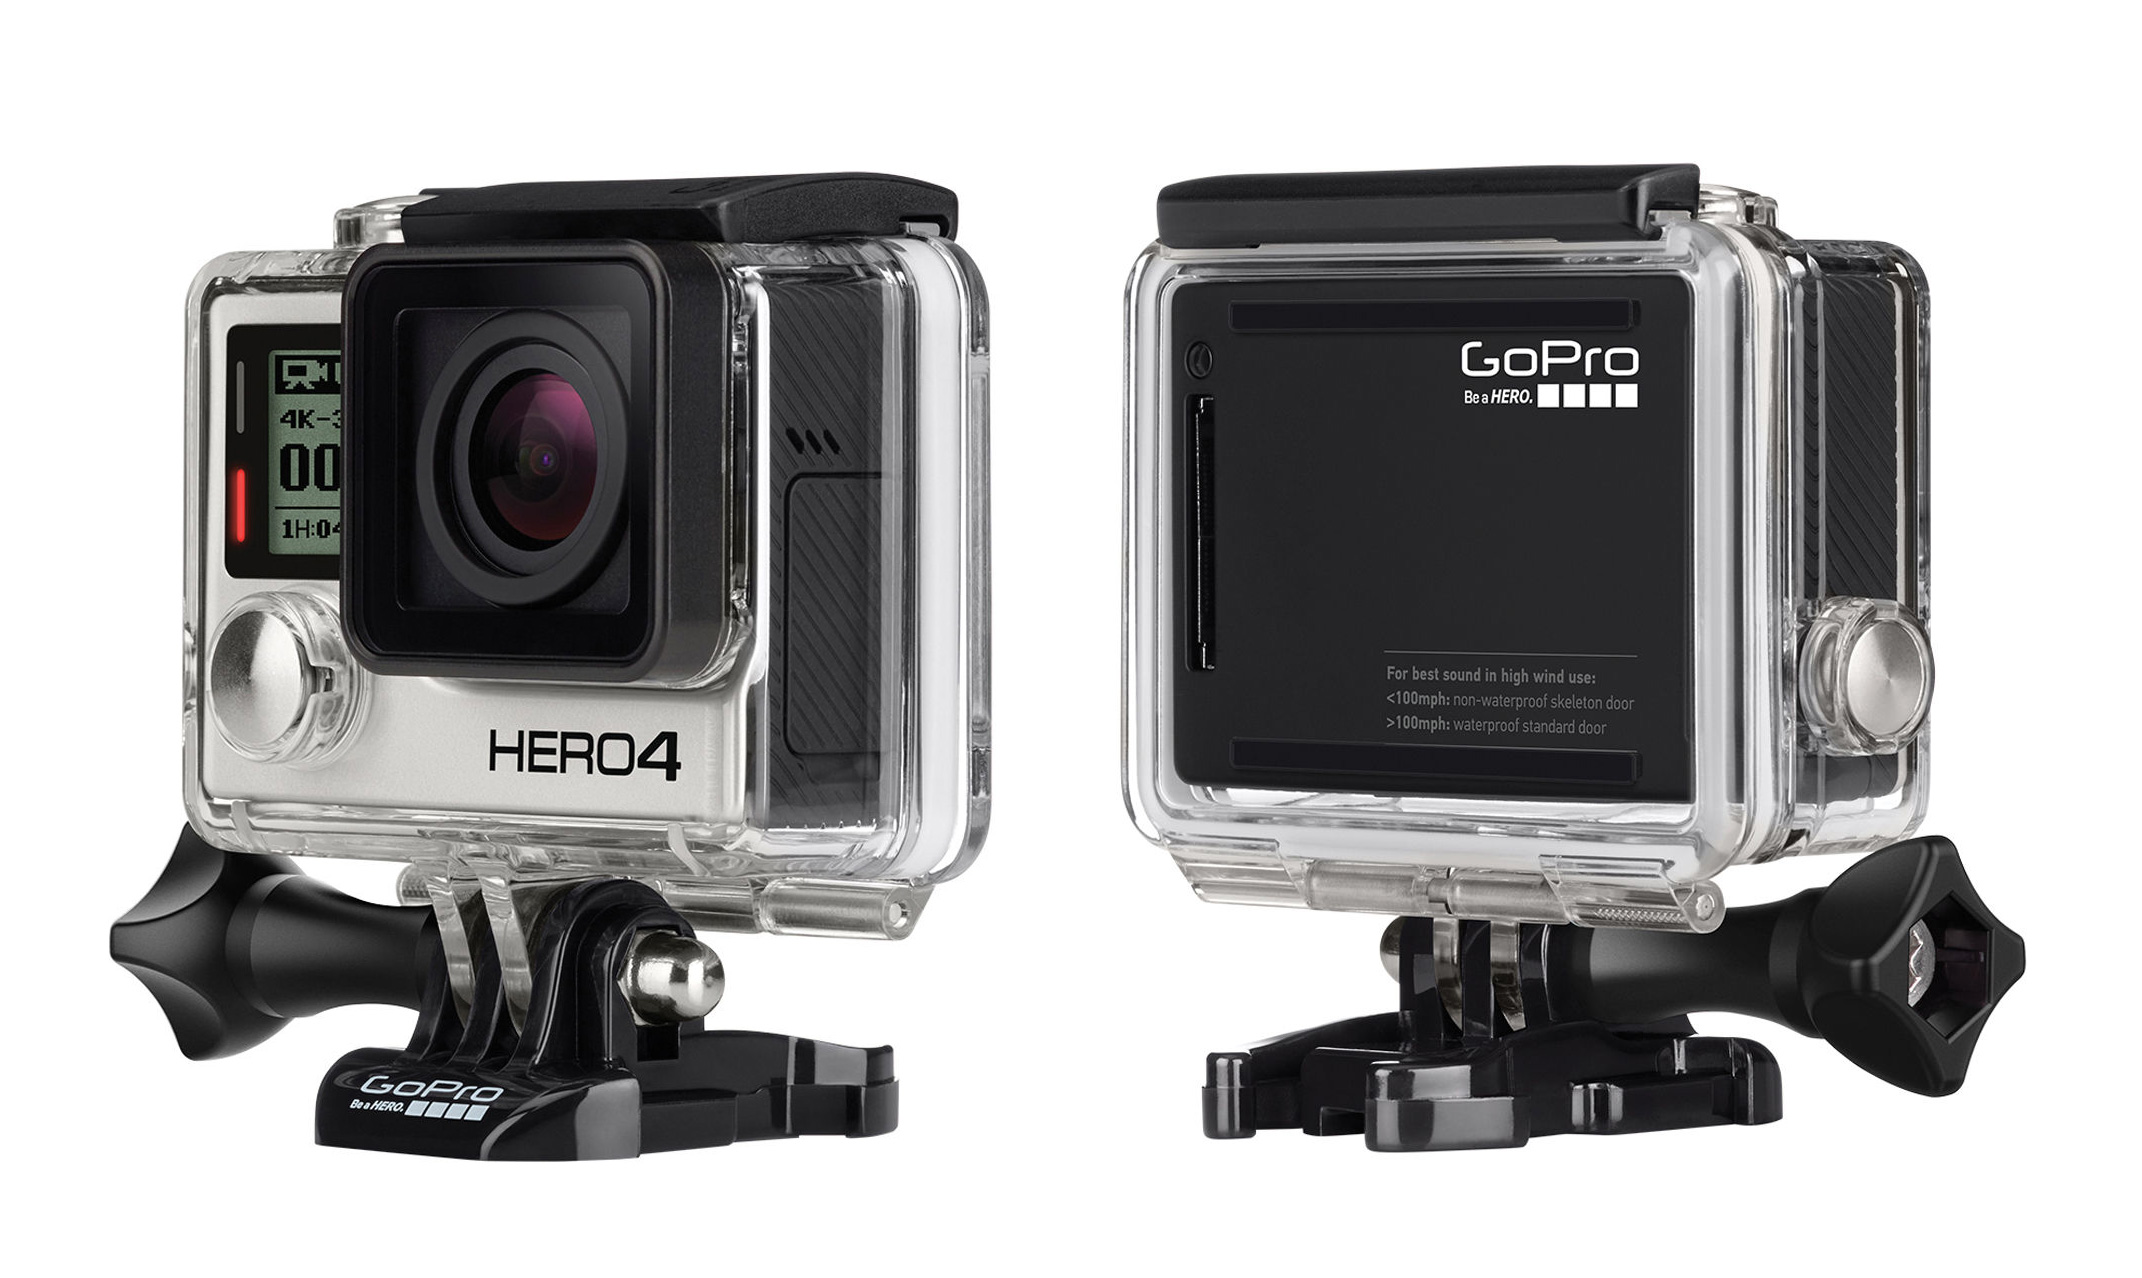 GoPro HERO4 Offers 4K at 30 fps, Price for $499